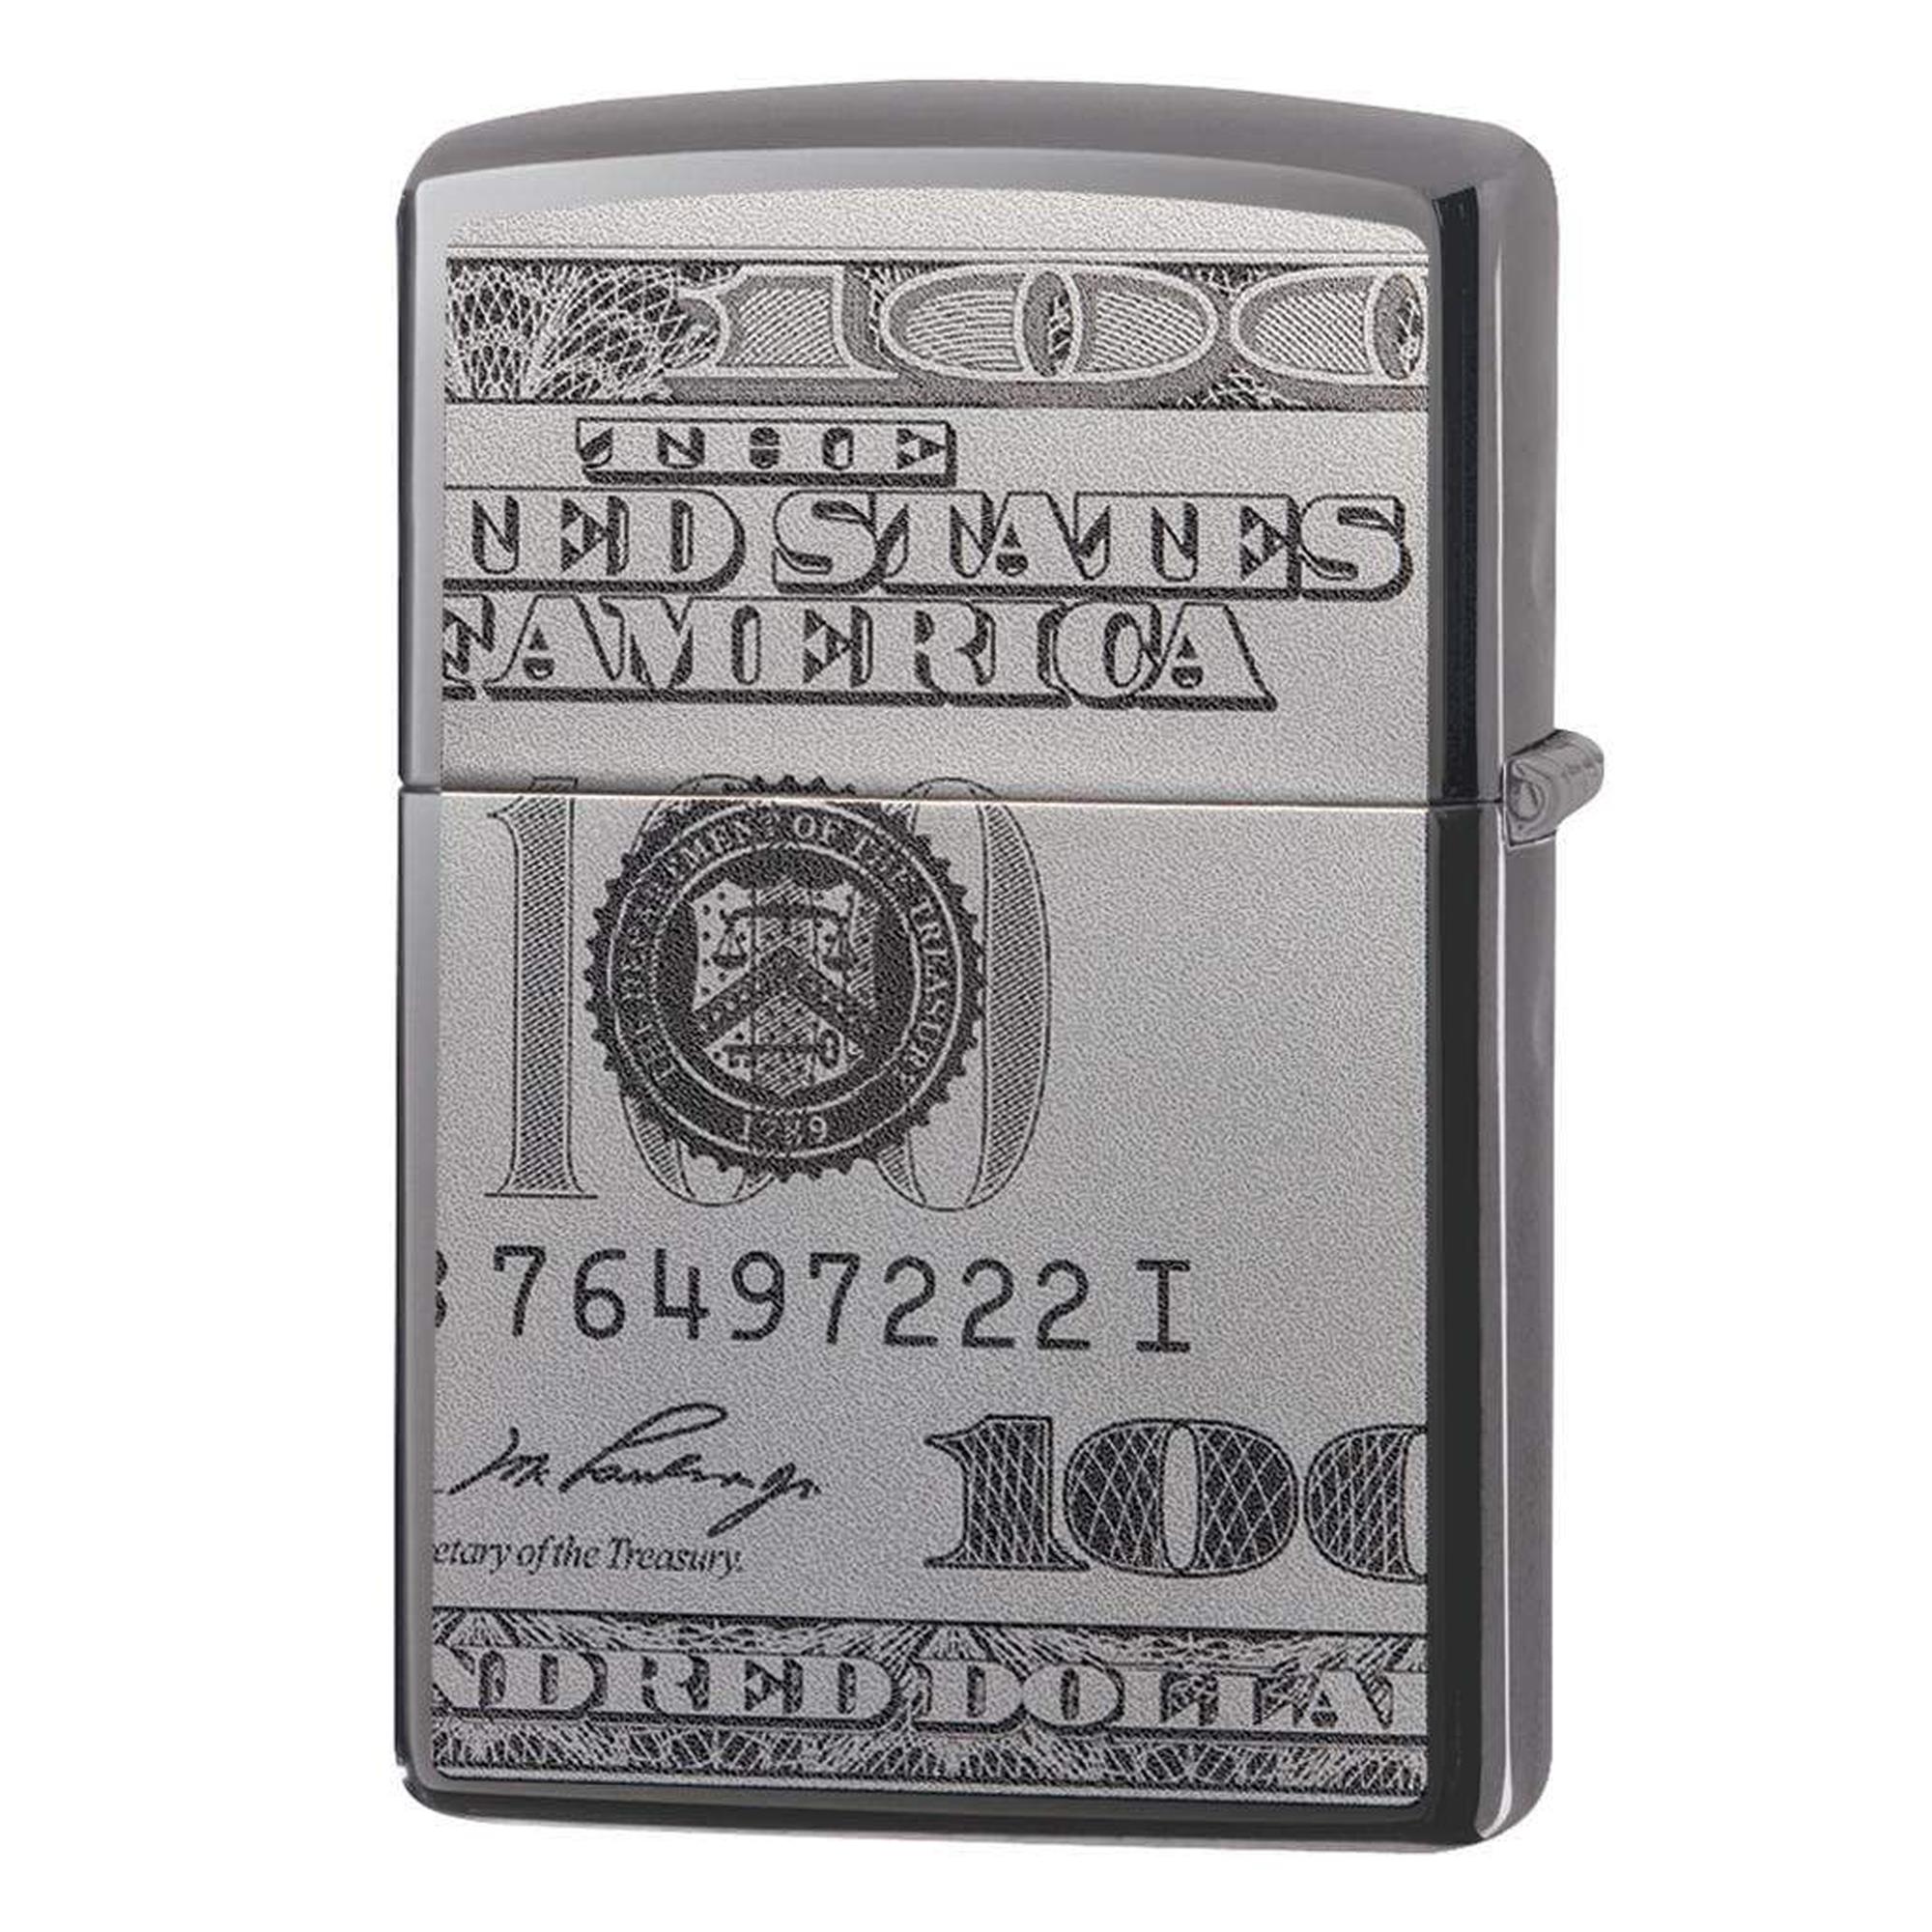 ZIPPO CURRENCY DESIGN